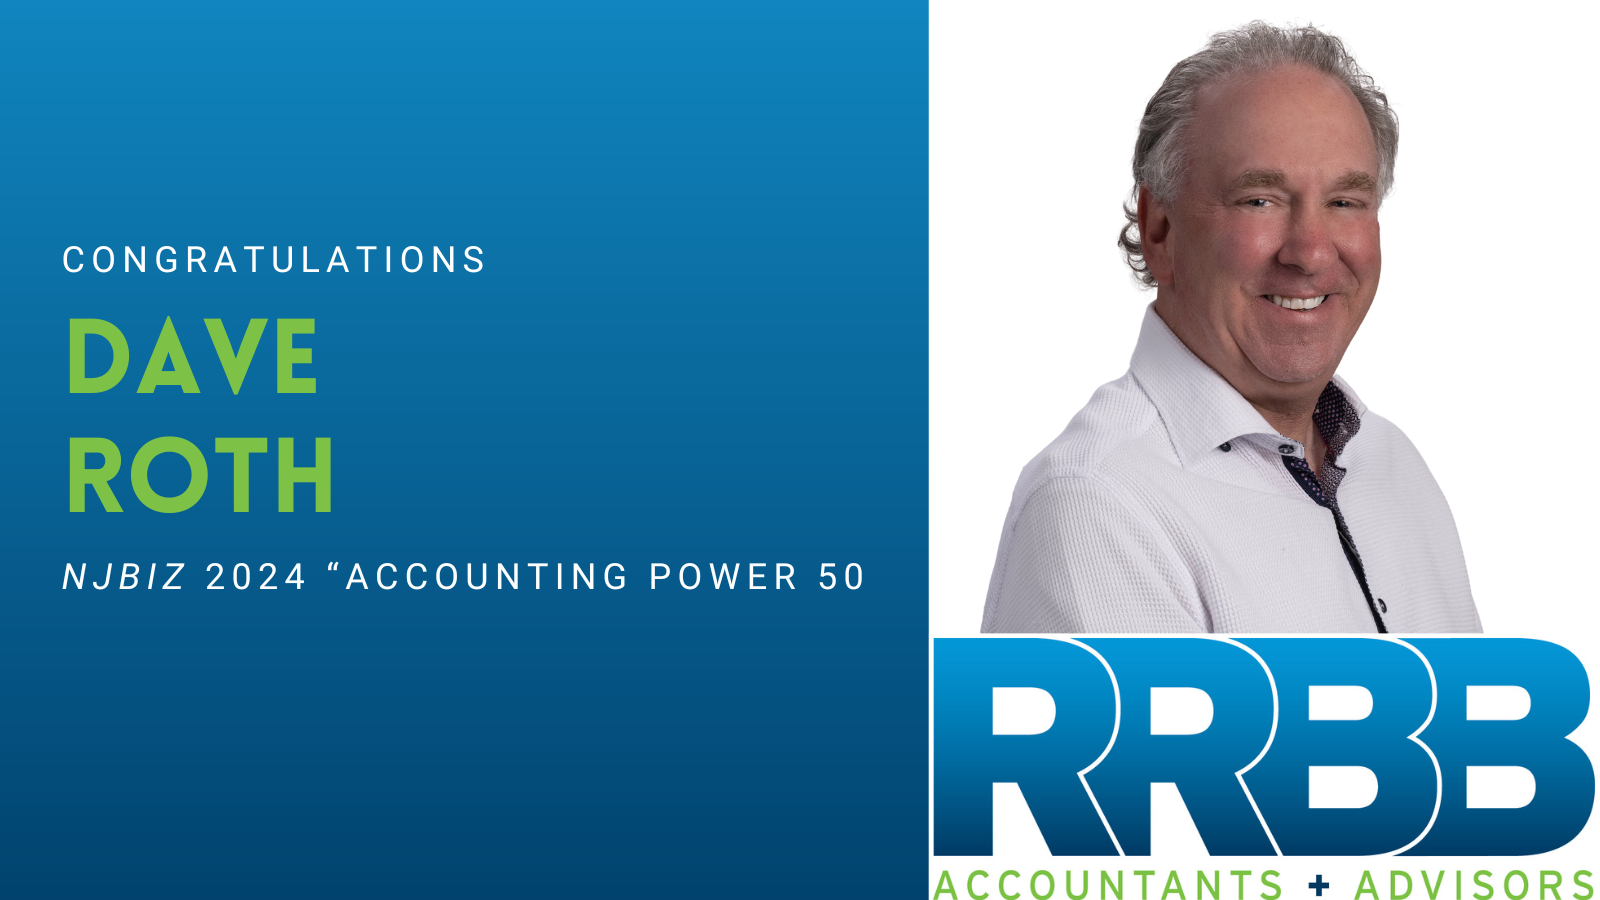 Dave Roth Listed in 2024 NJBIZ “Accounting Power 50”